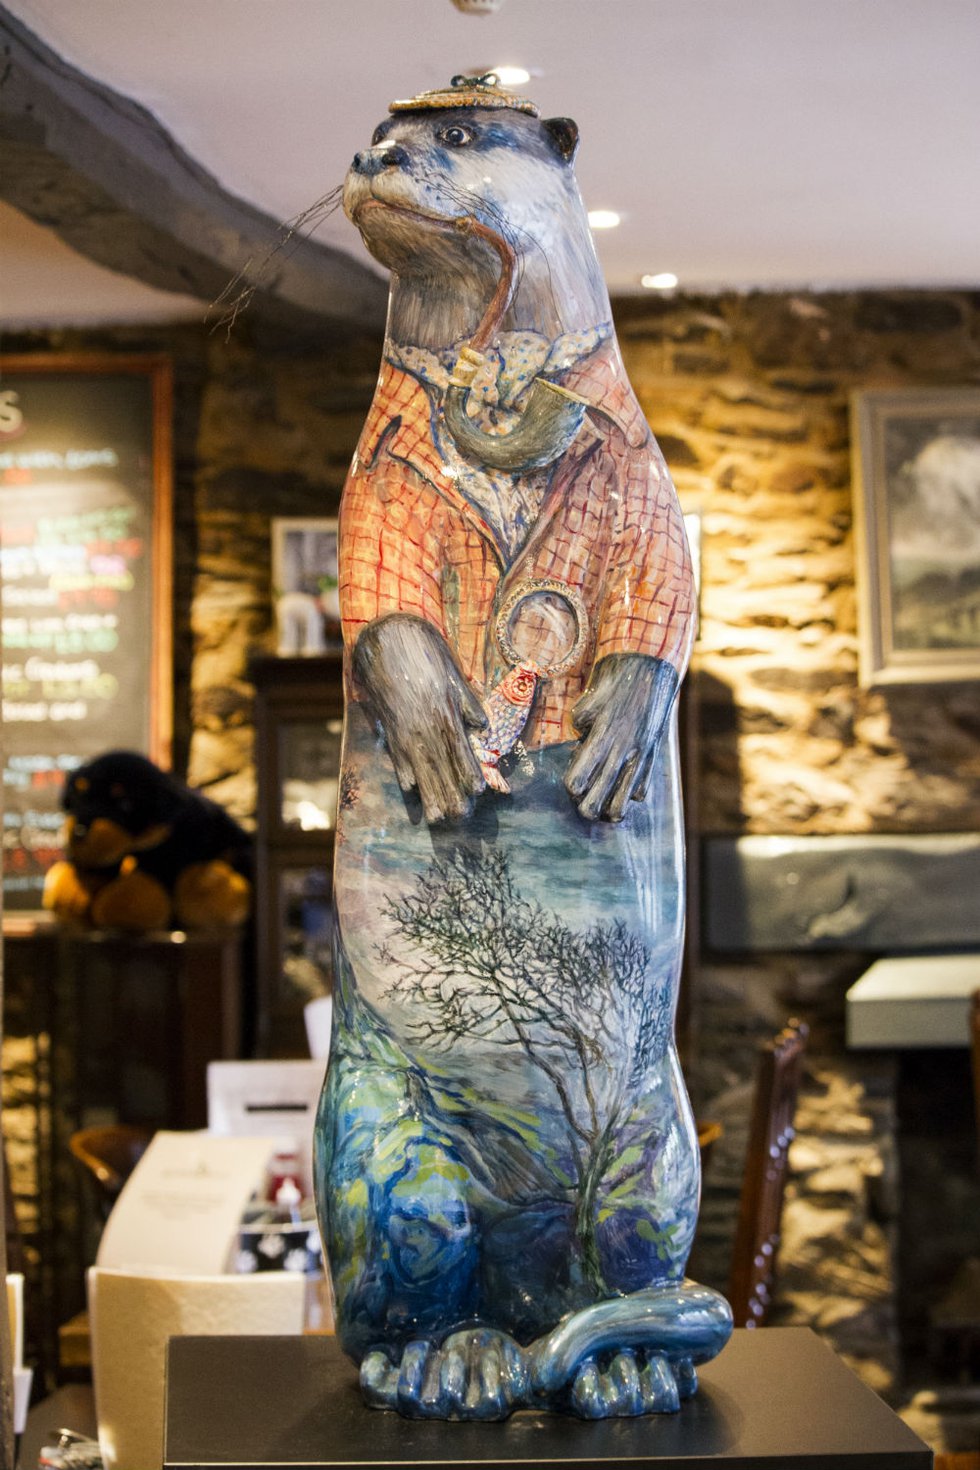 'Elementary My Dear Otter' by Ann L. Roe, which evokes the haunting Dartmoor setting of Hound of the Baskervilles, will join the Golden Otters at auction on 30 September.jpg